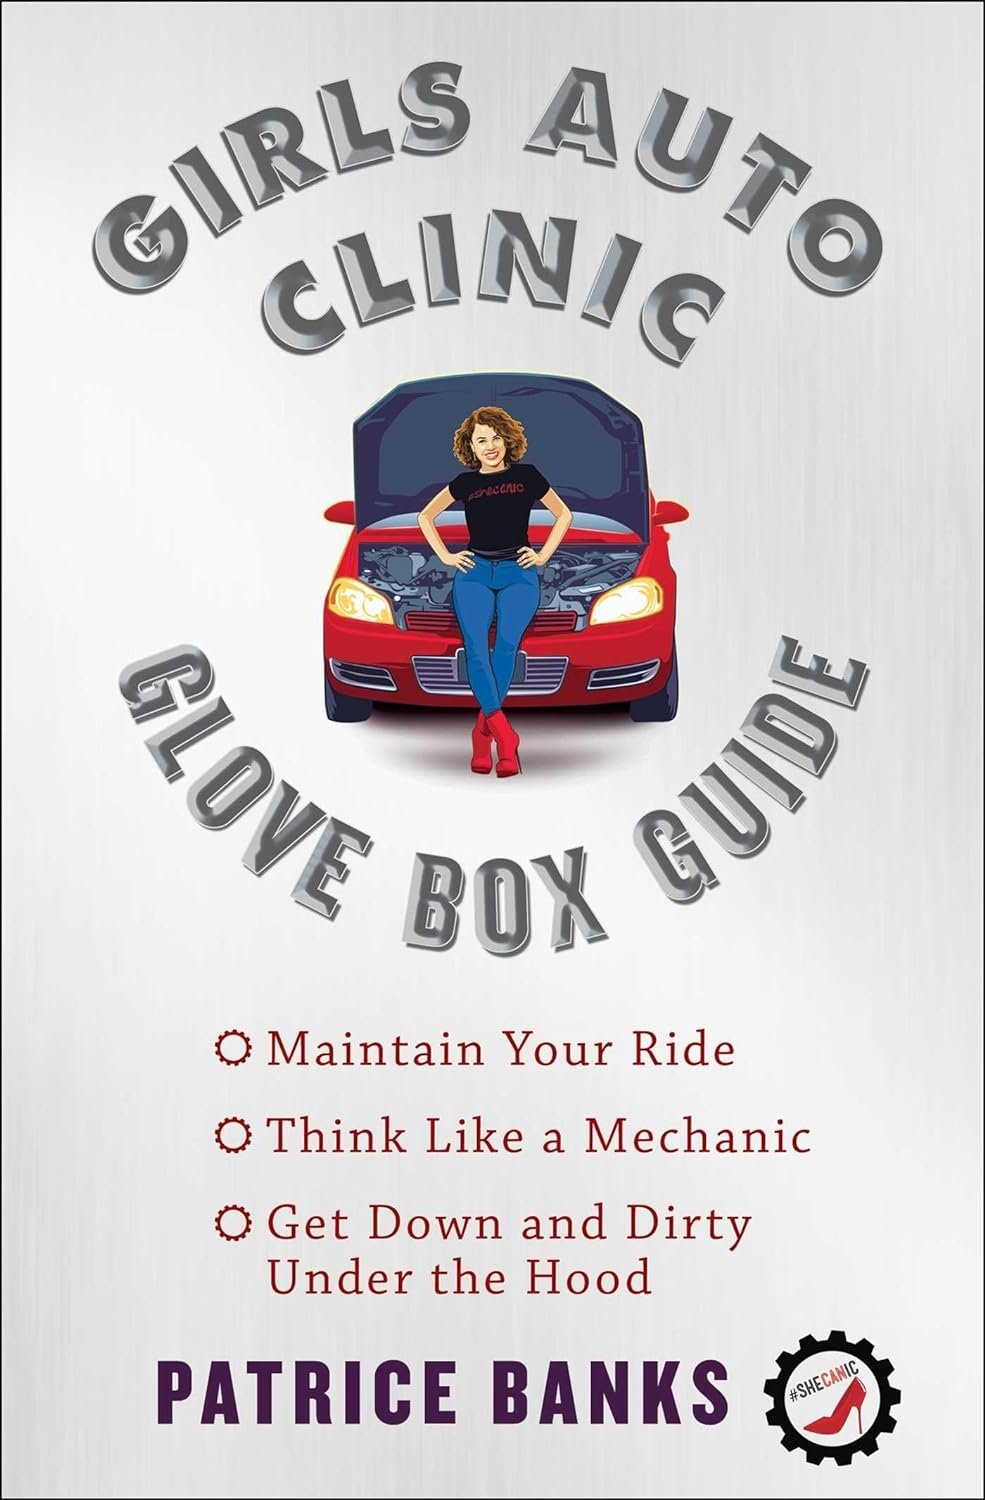 Girls Auto Clinic Glove Box Guide Paperback Review